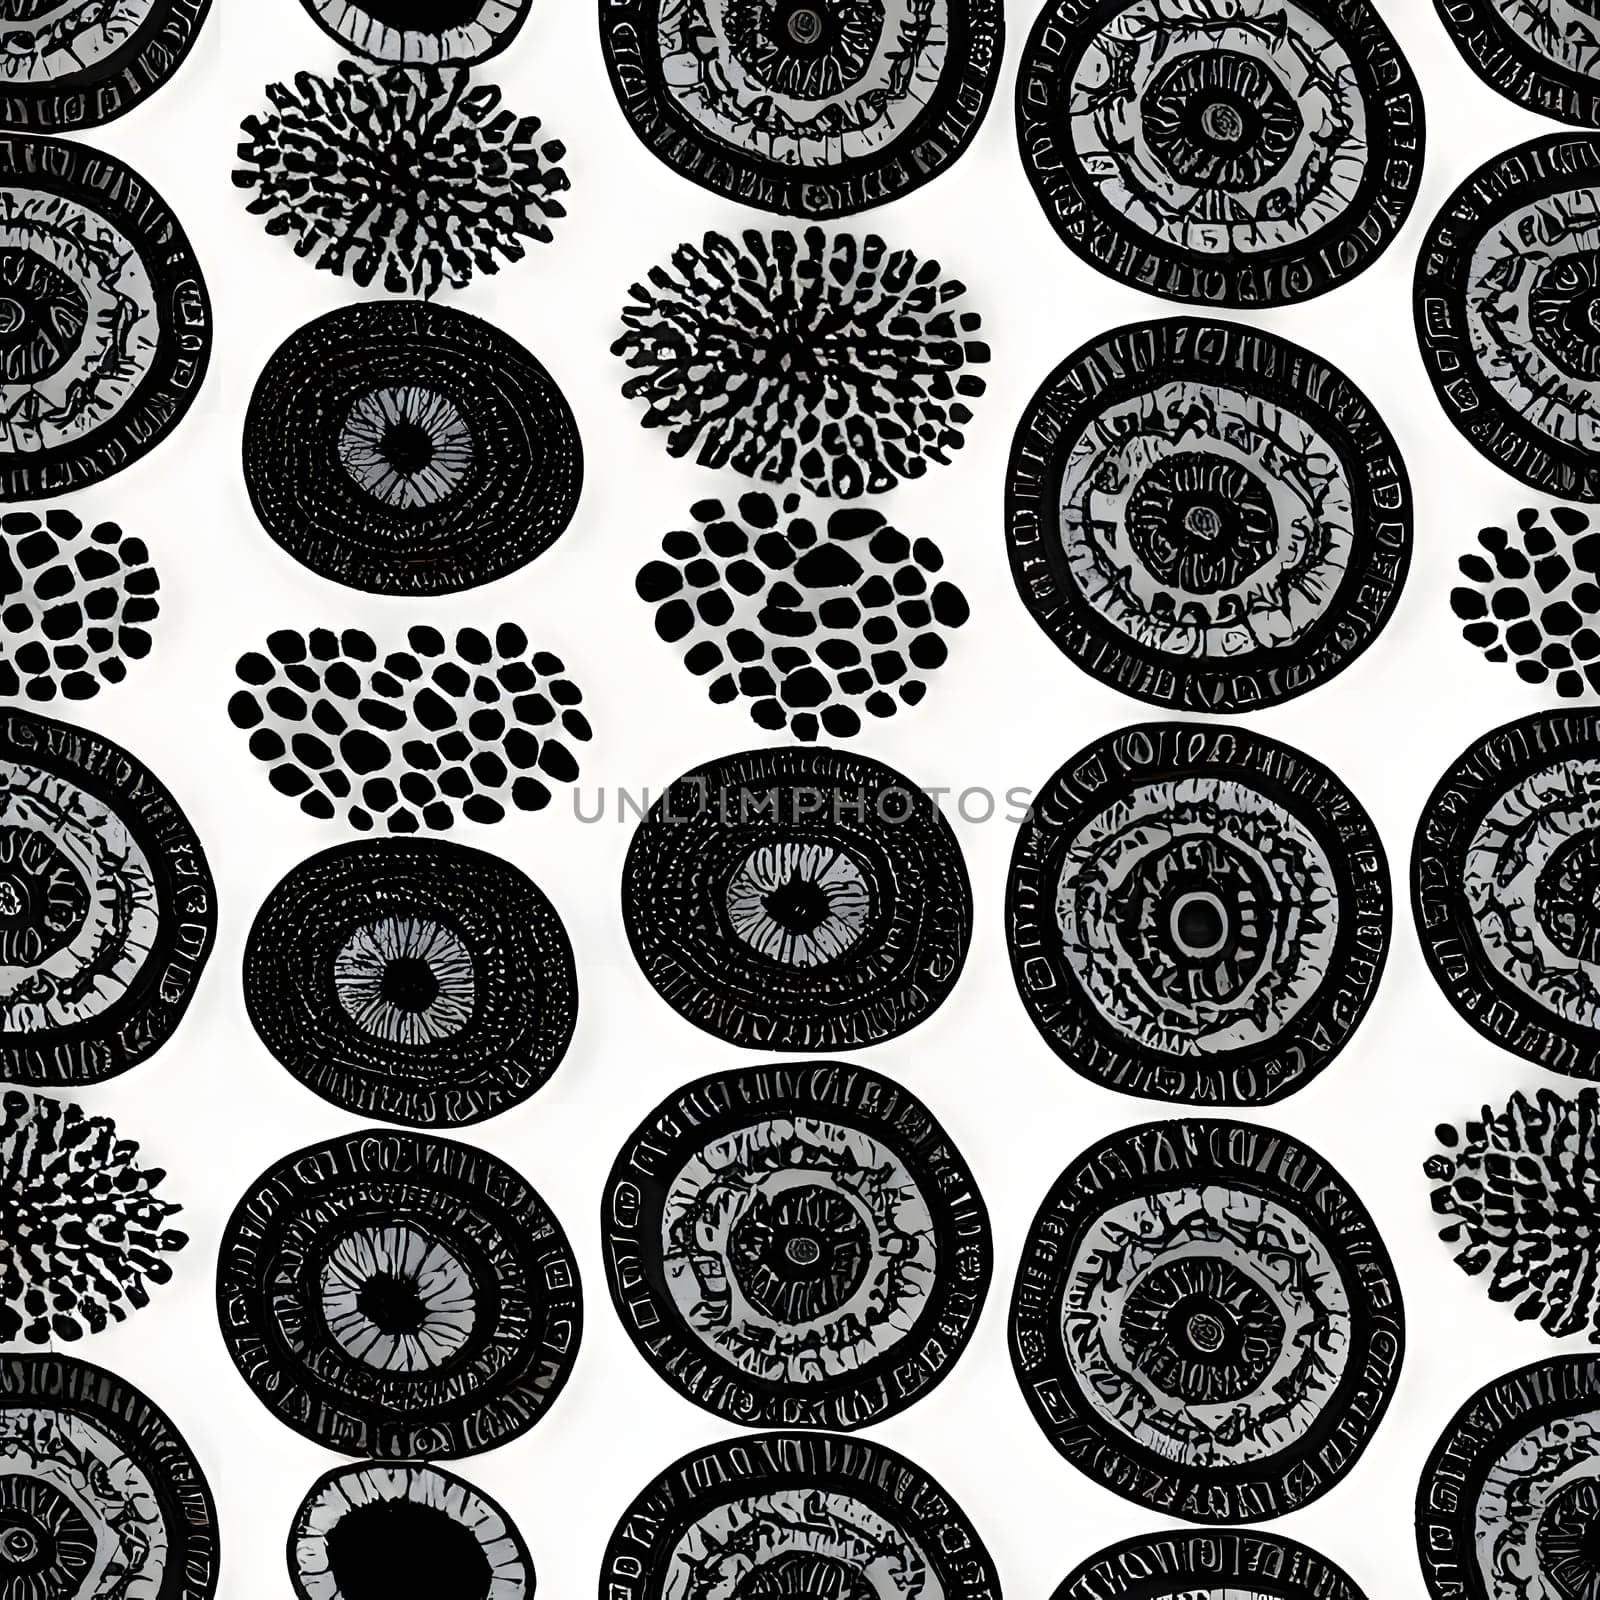 Patterns and banners backgrounds: Seamless pattern with black circles on white background. Vector illustration.